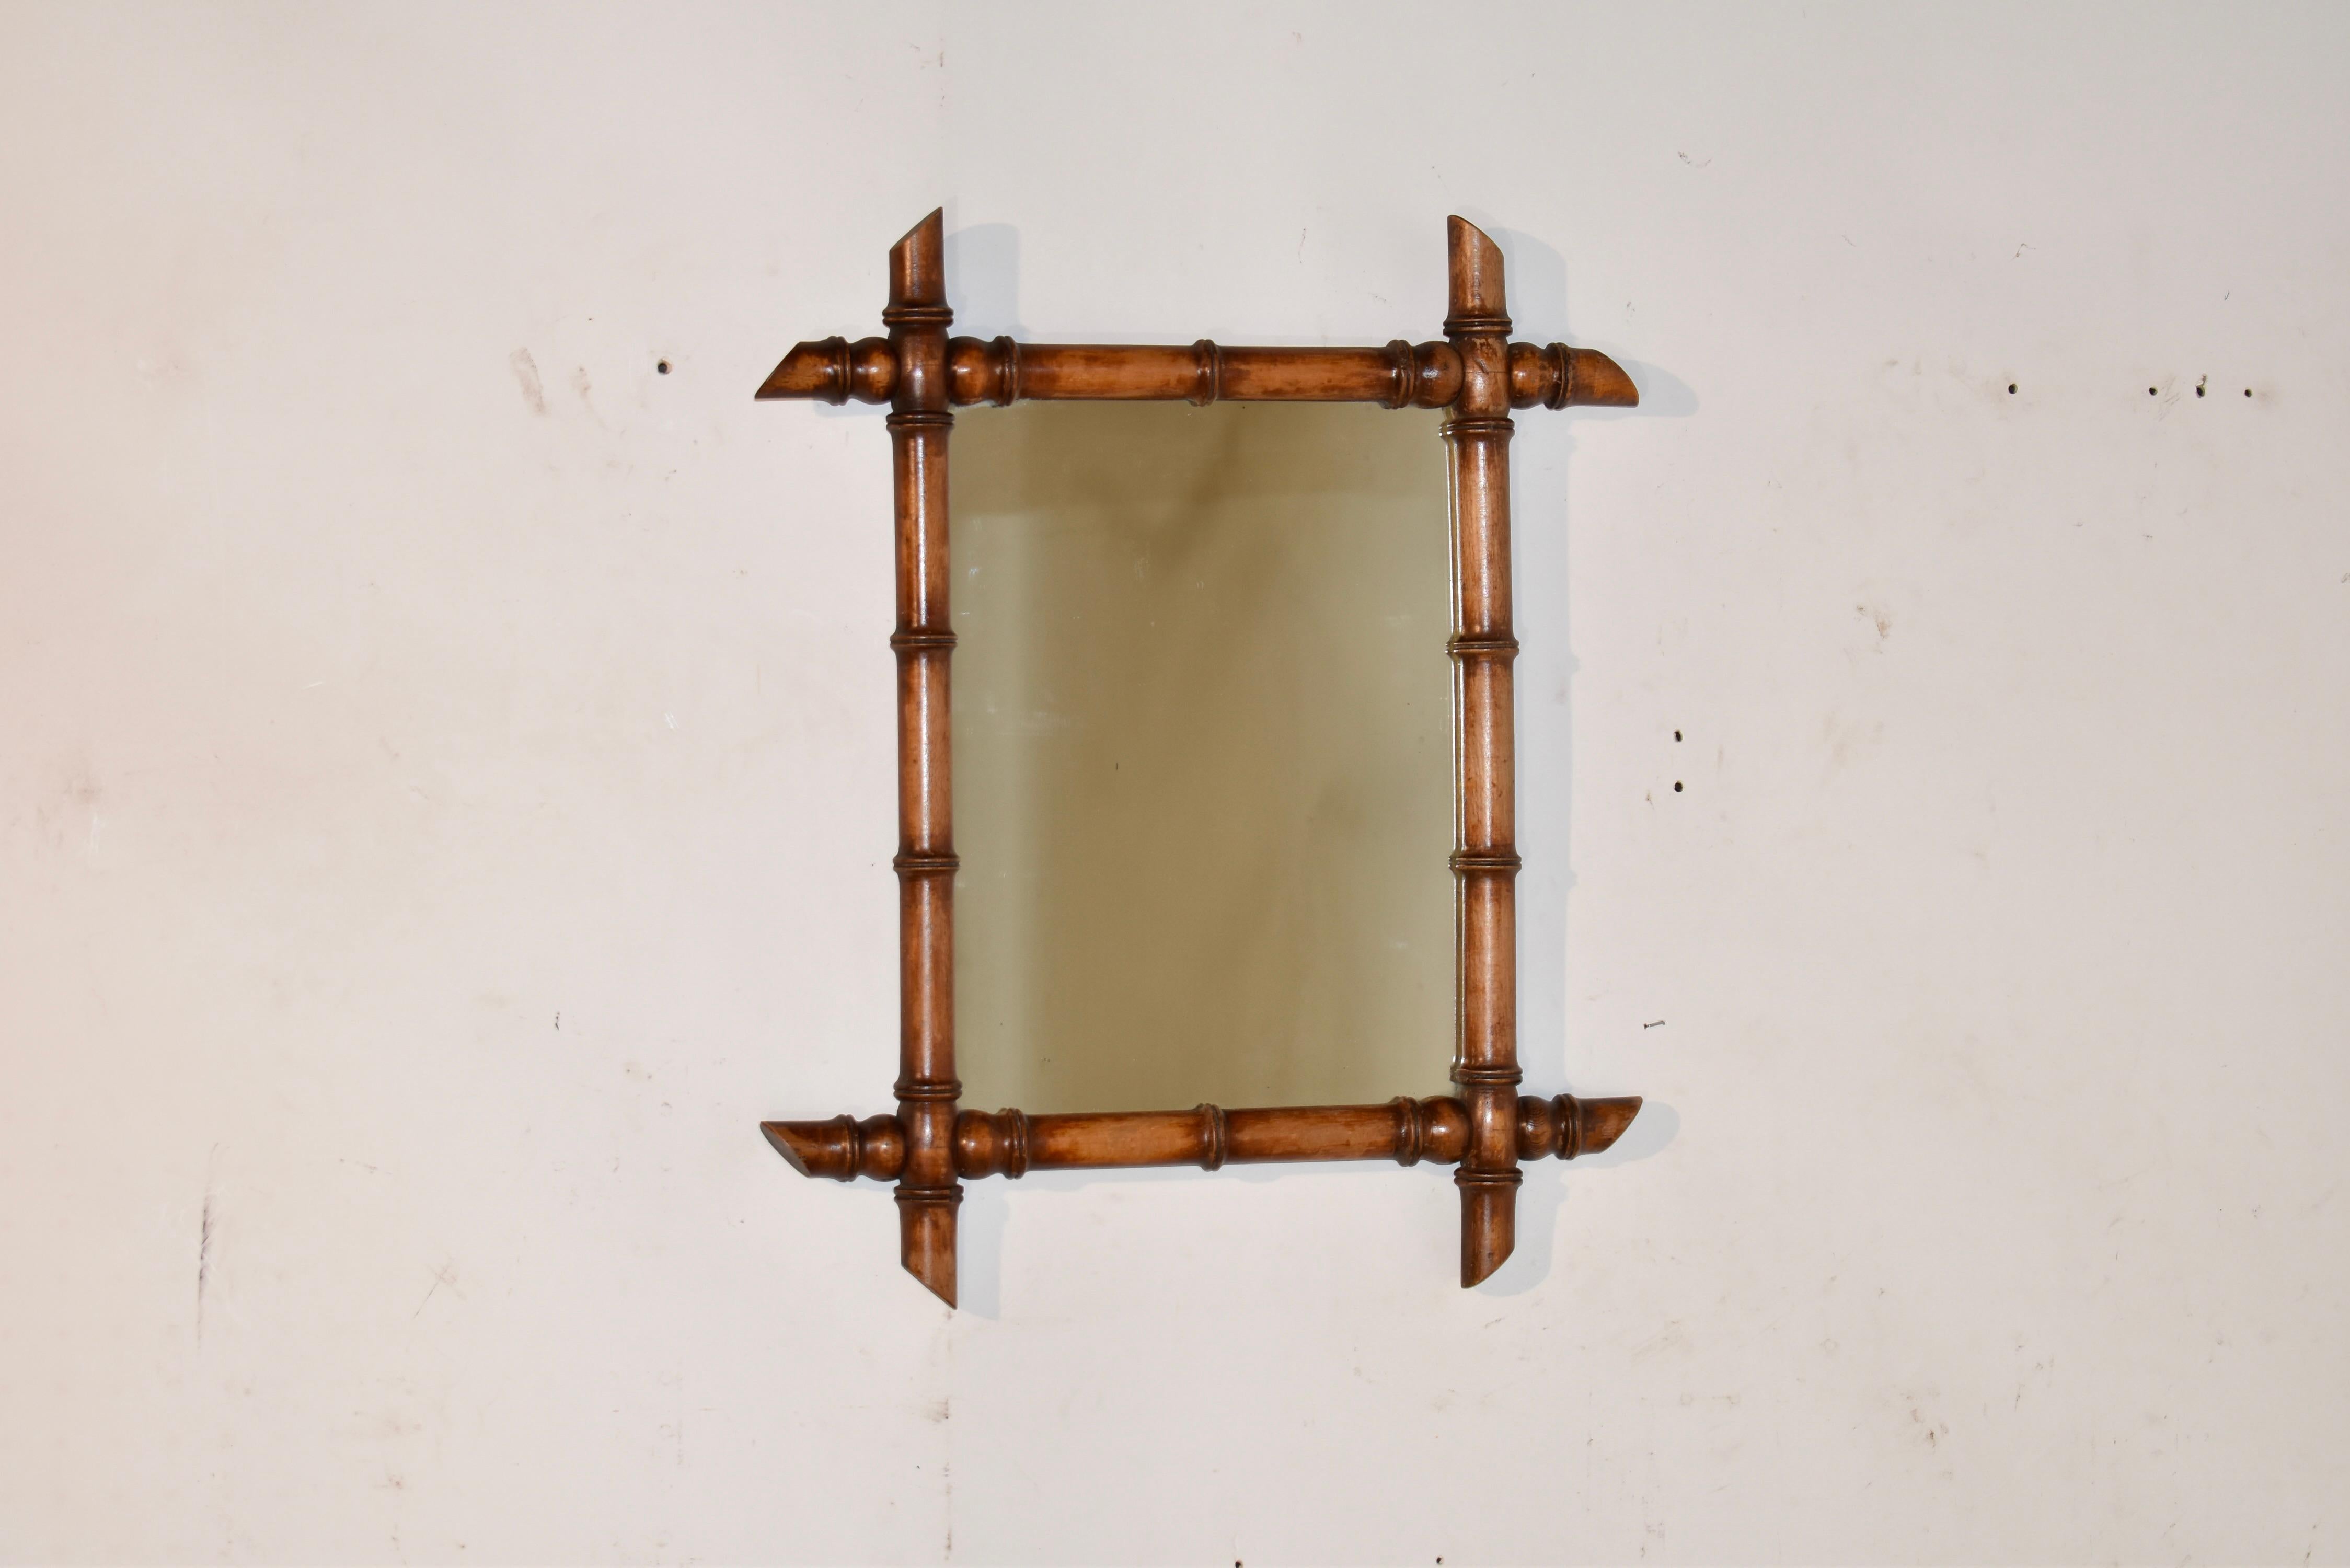 Late 19th century faux bamboo turned mirror frame from France.  The frame is turned from cherry, and is surrounding a central glass mirror. These are great accessories to warm up any decor.